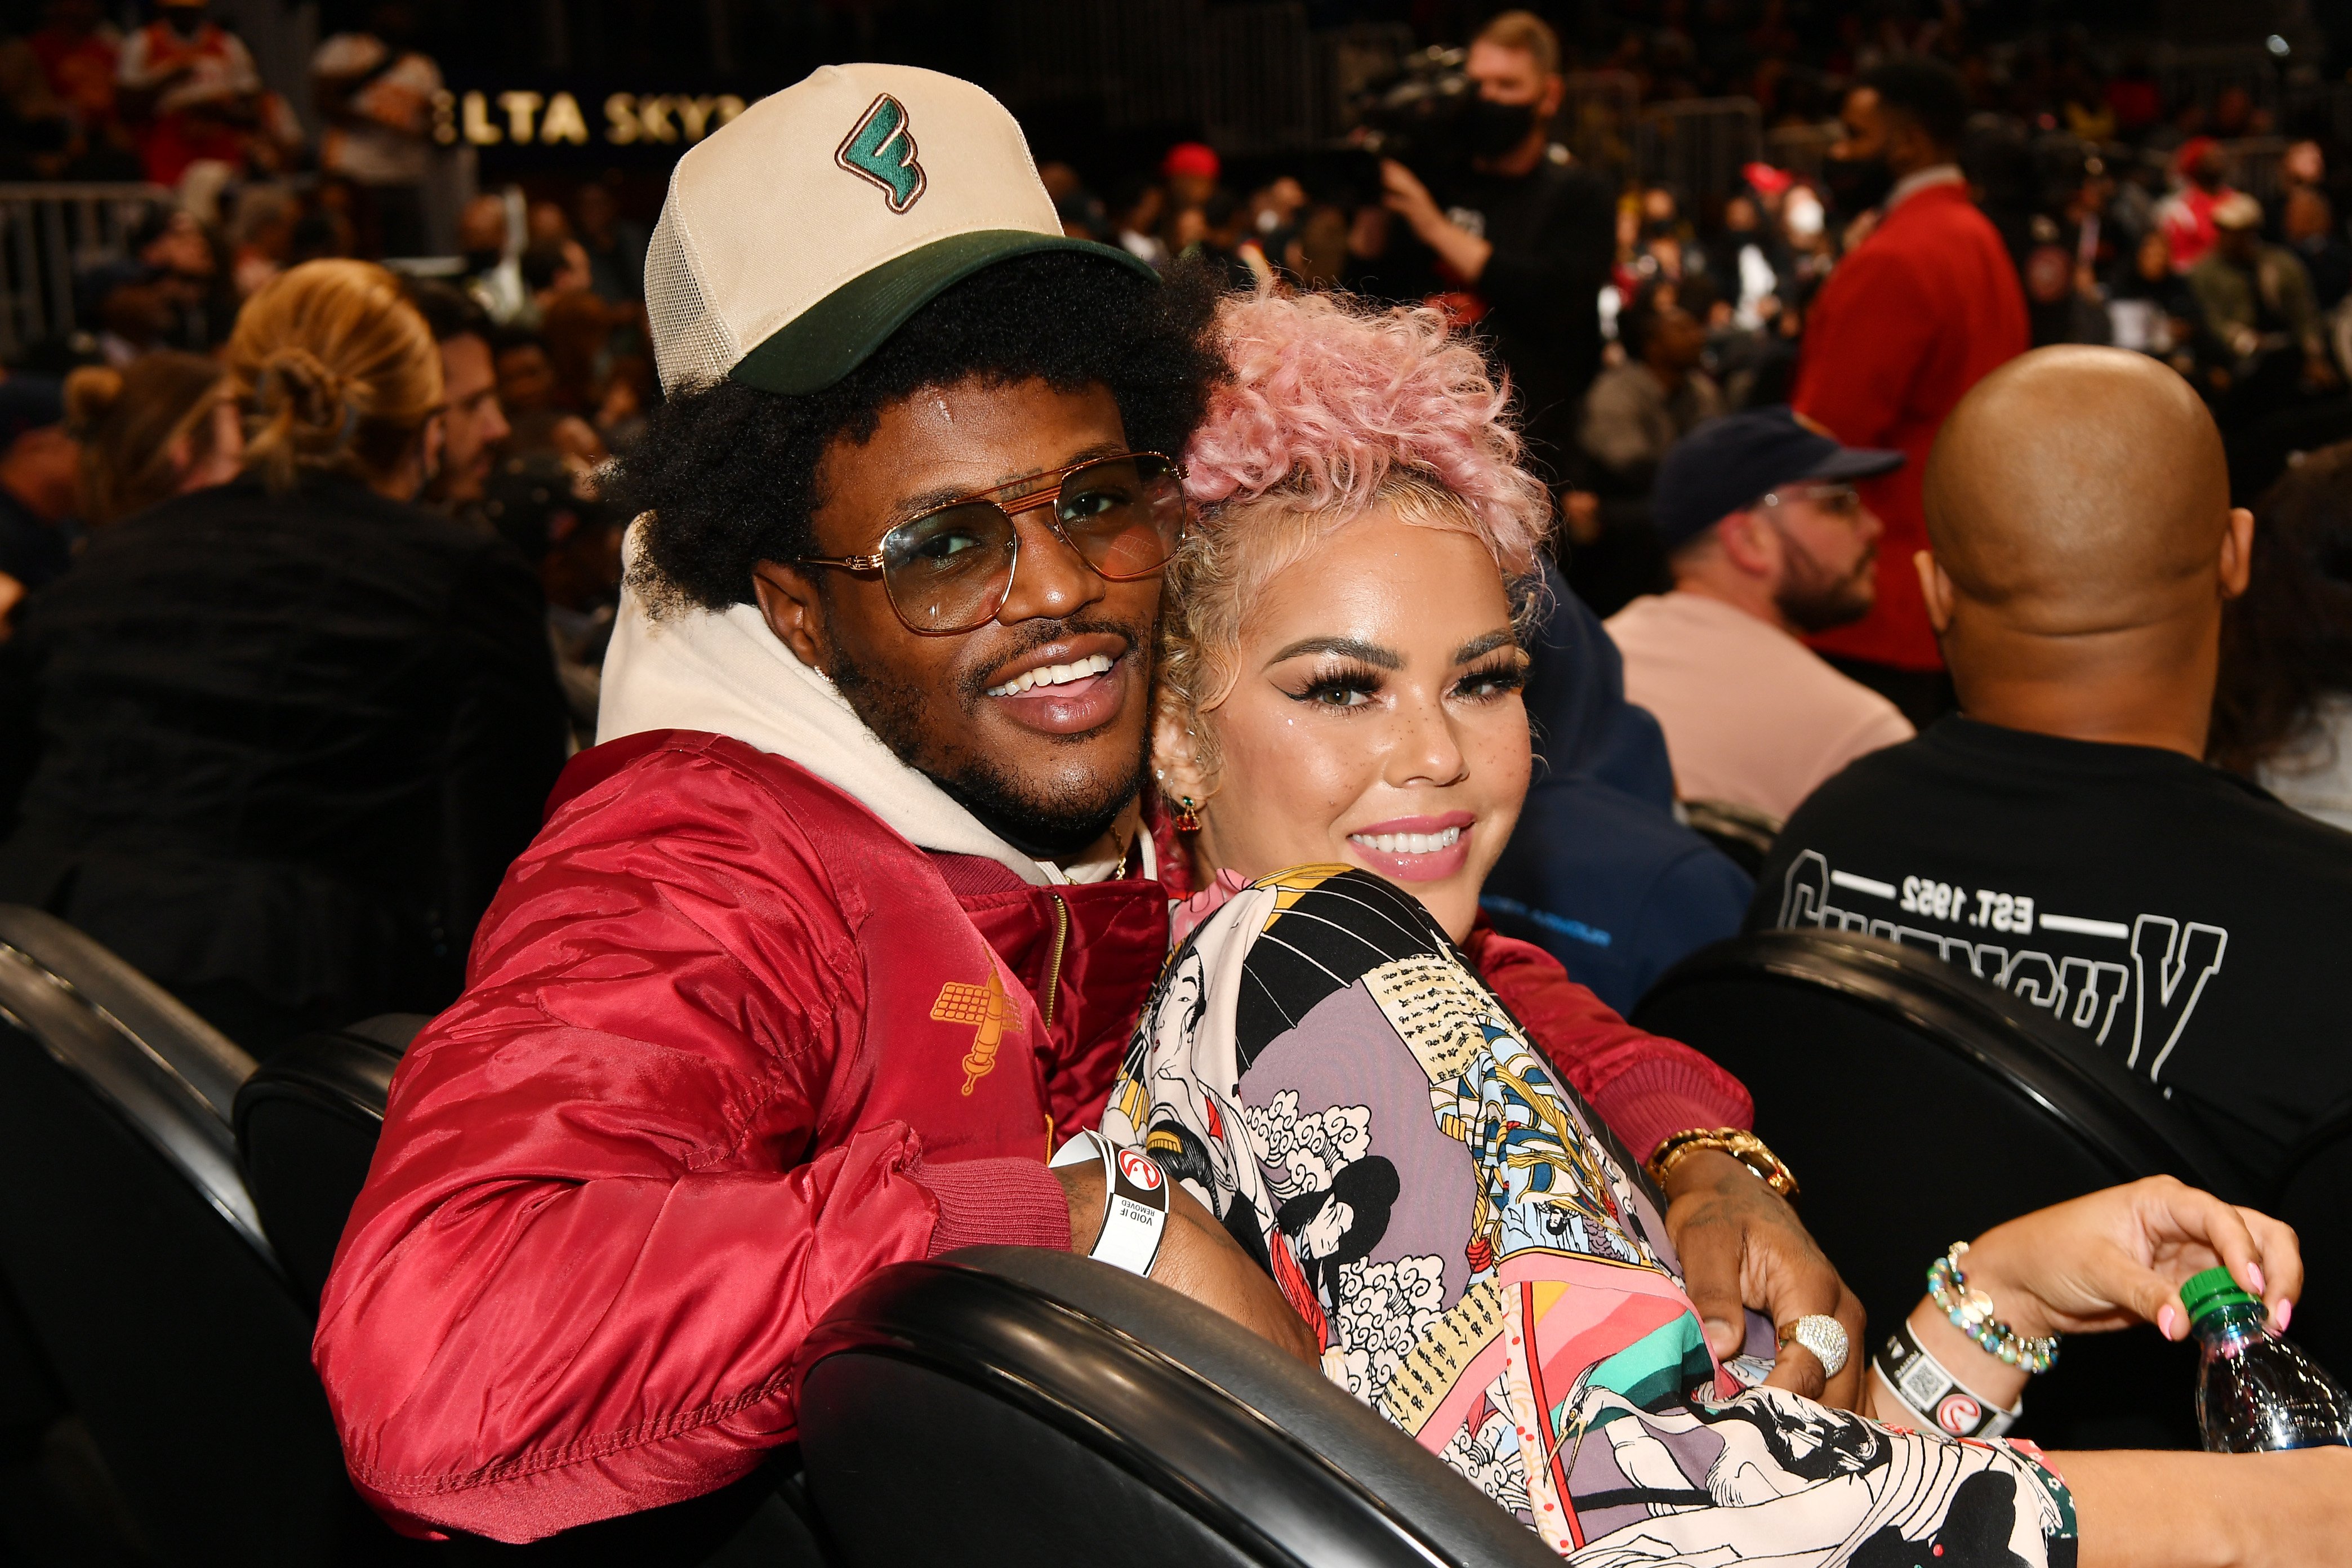 DC Young Fly and Jacky Oh at the State Farm Arena attending the game between the Denver Nuggets and the Atlanta Hawks on December 17, 2021, in Atlanta, Georgia. | Source: Getty Images